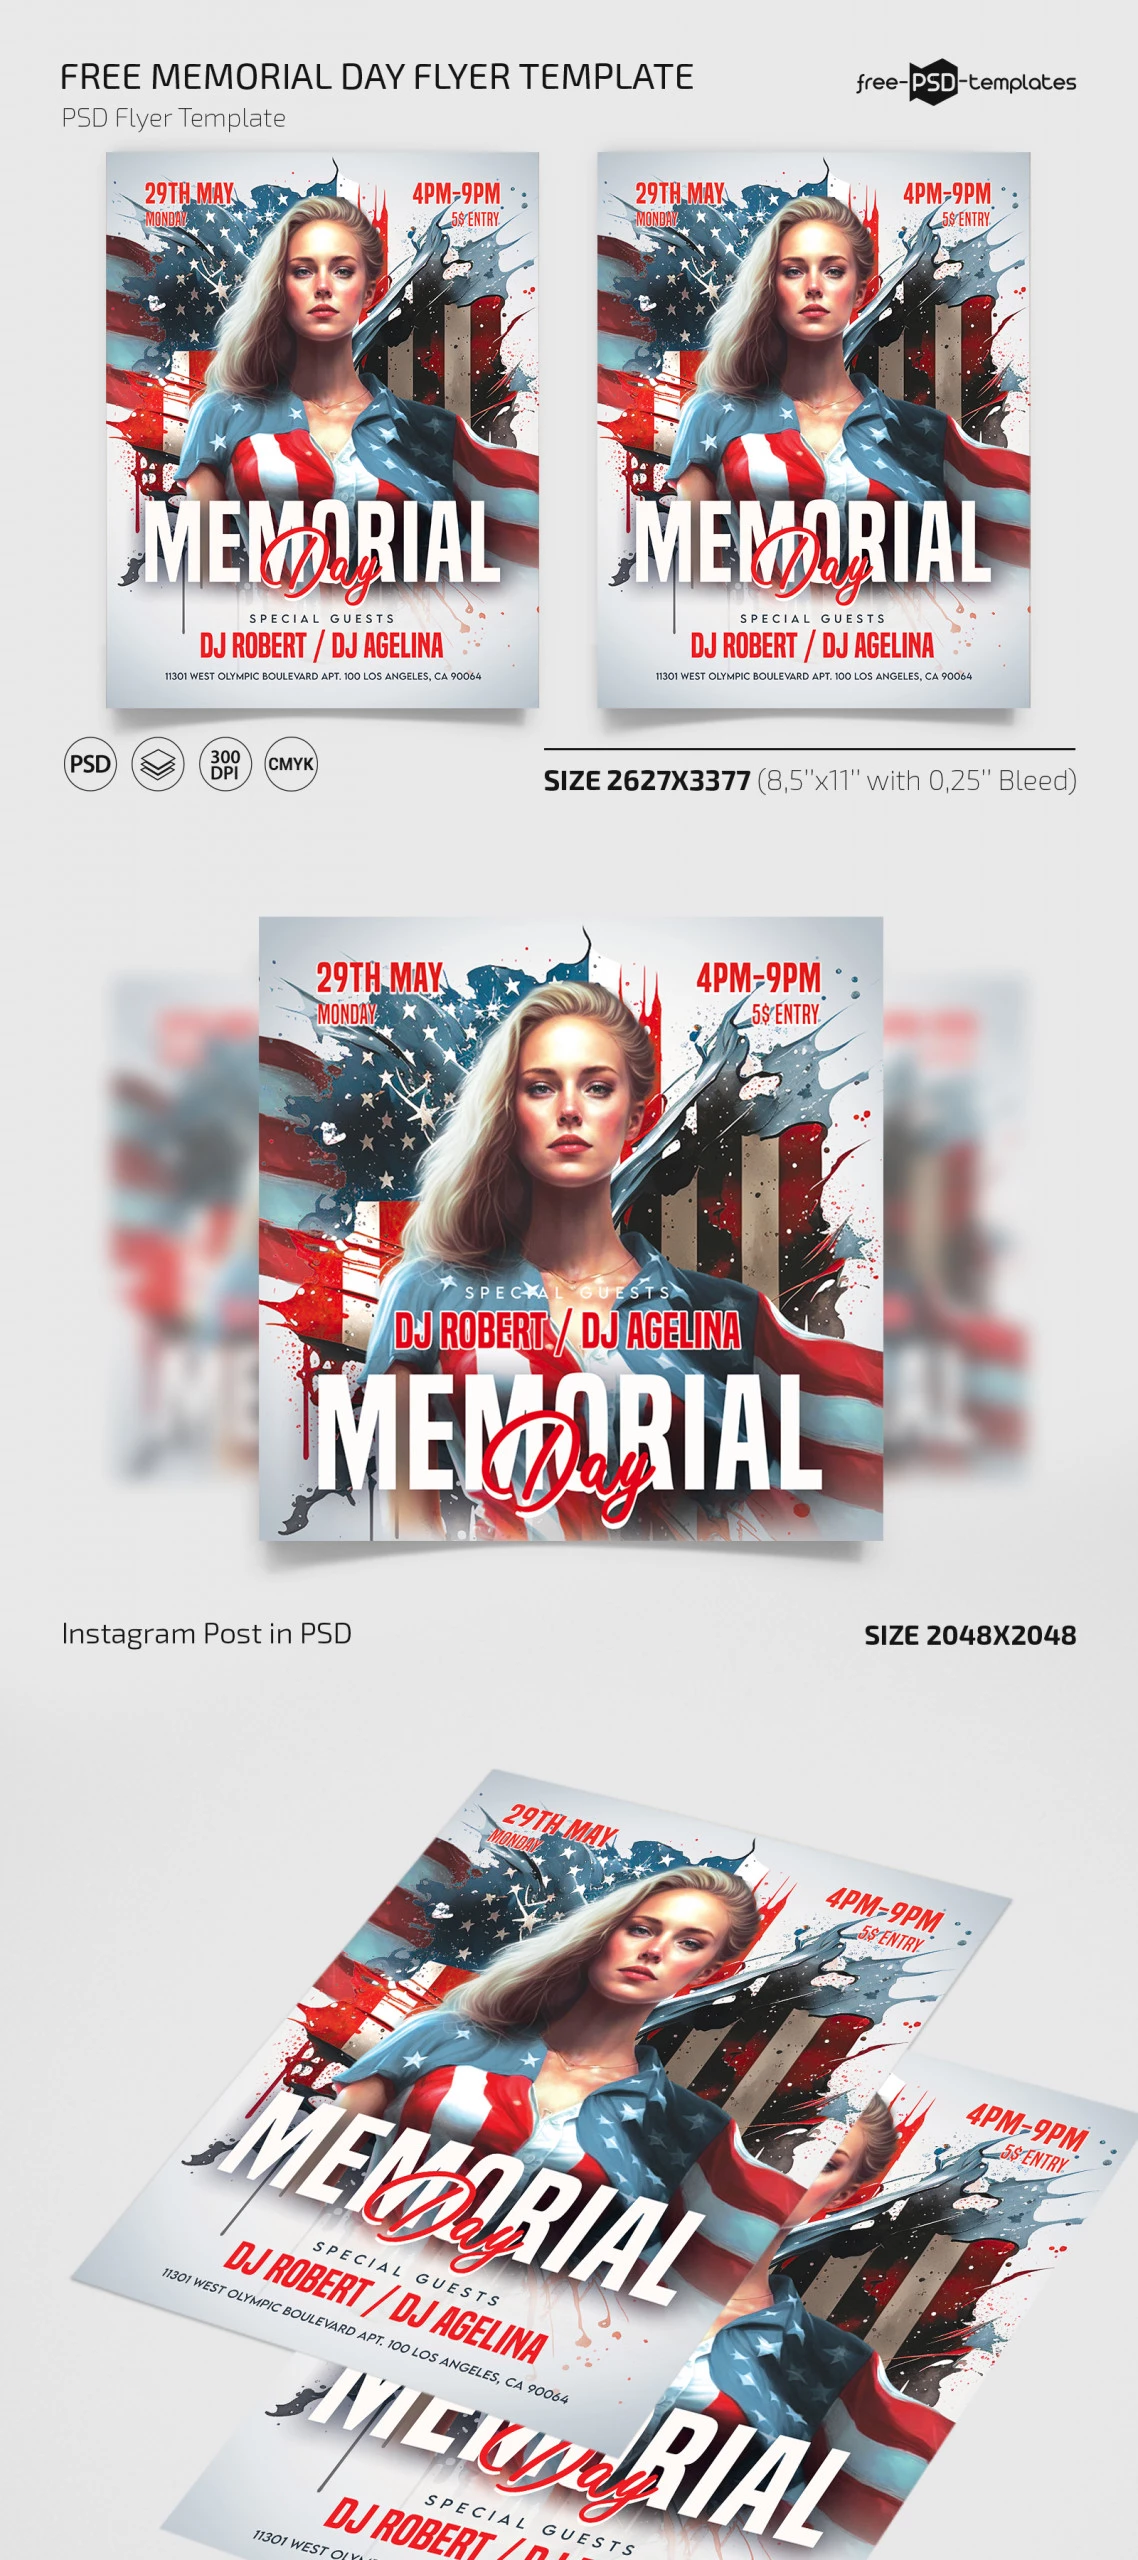 Free Memorial Day Flyer